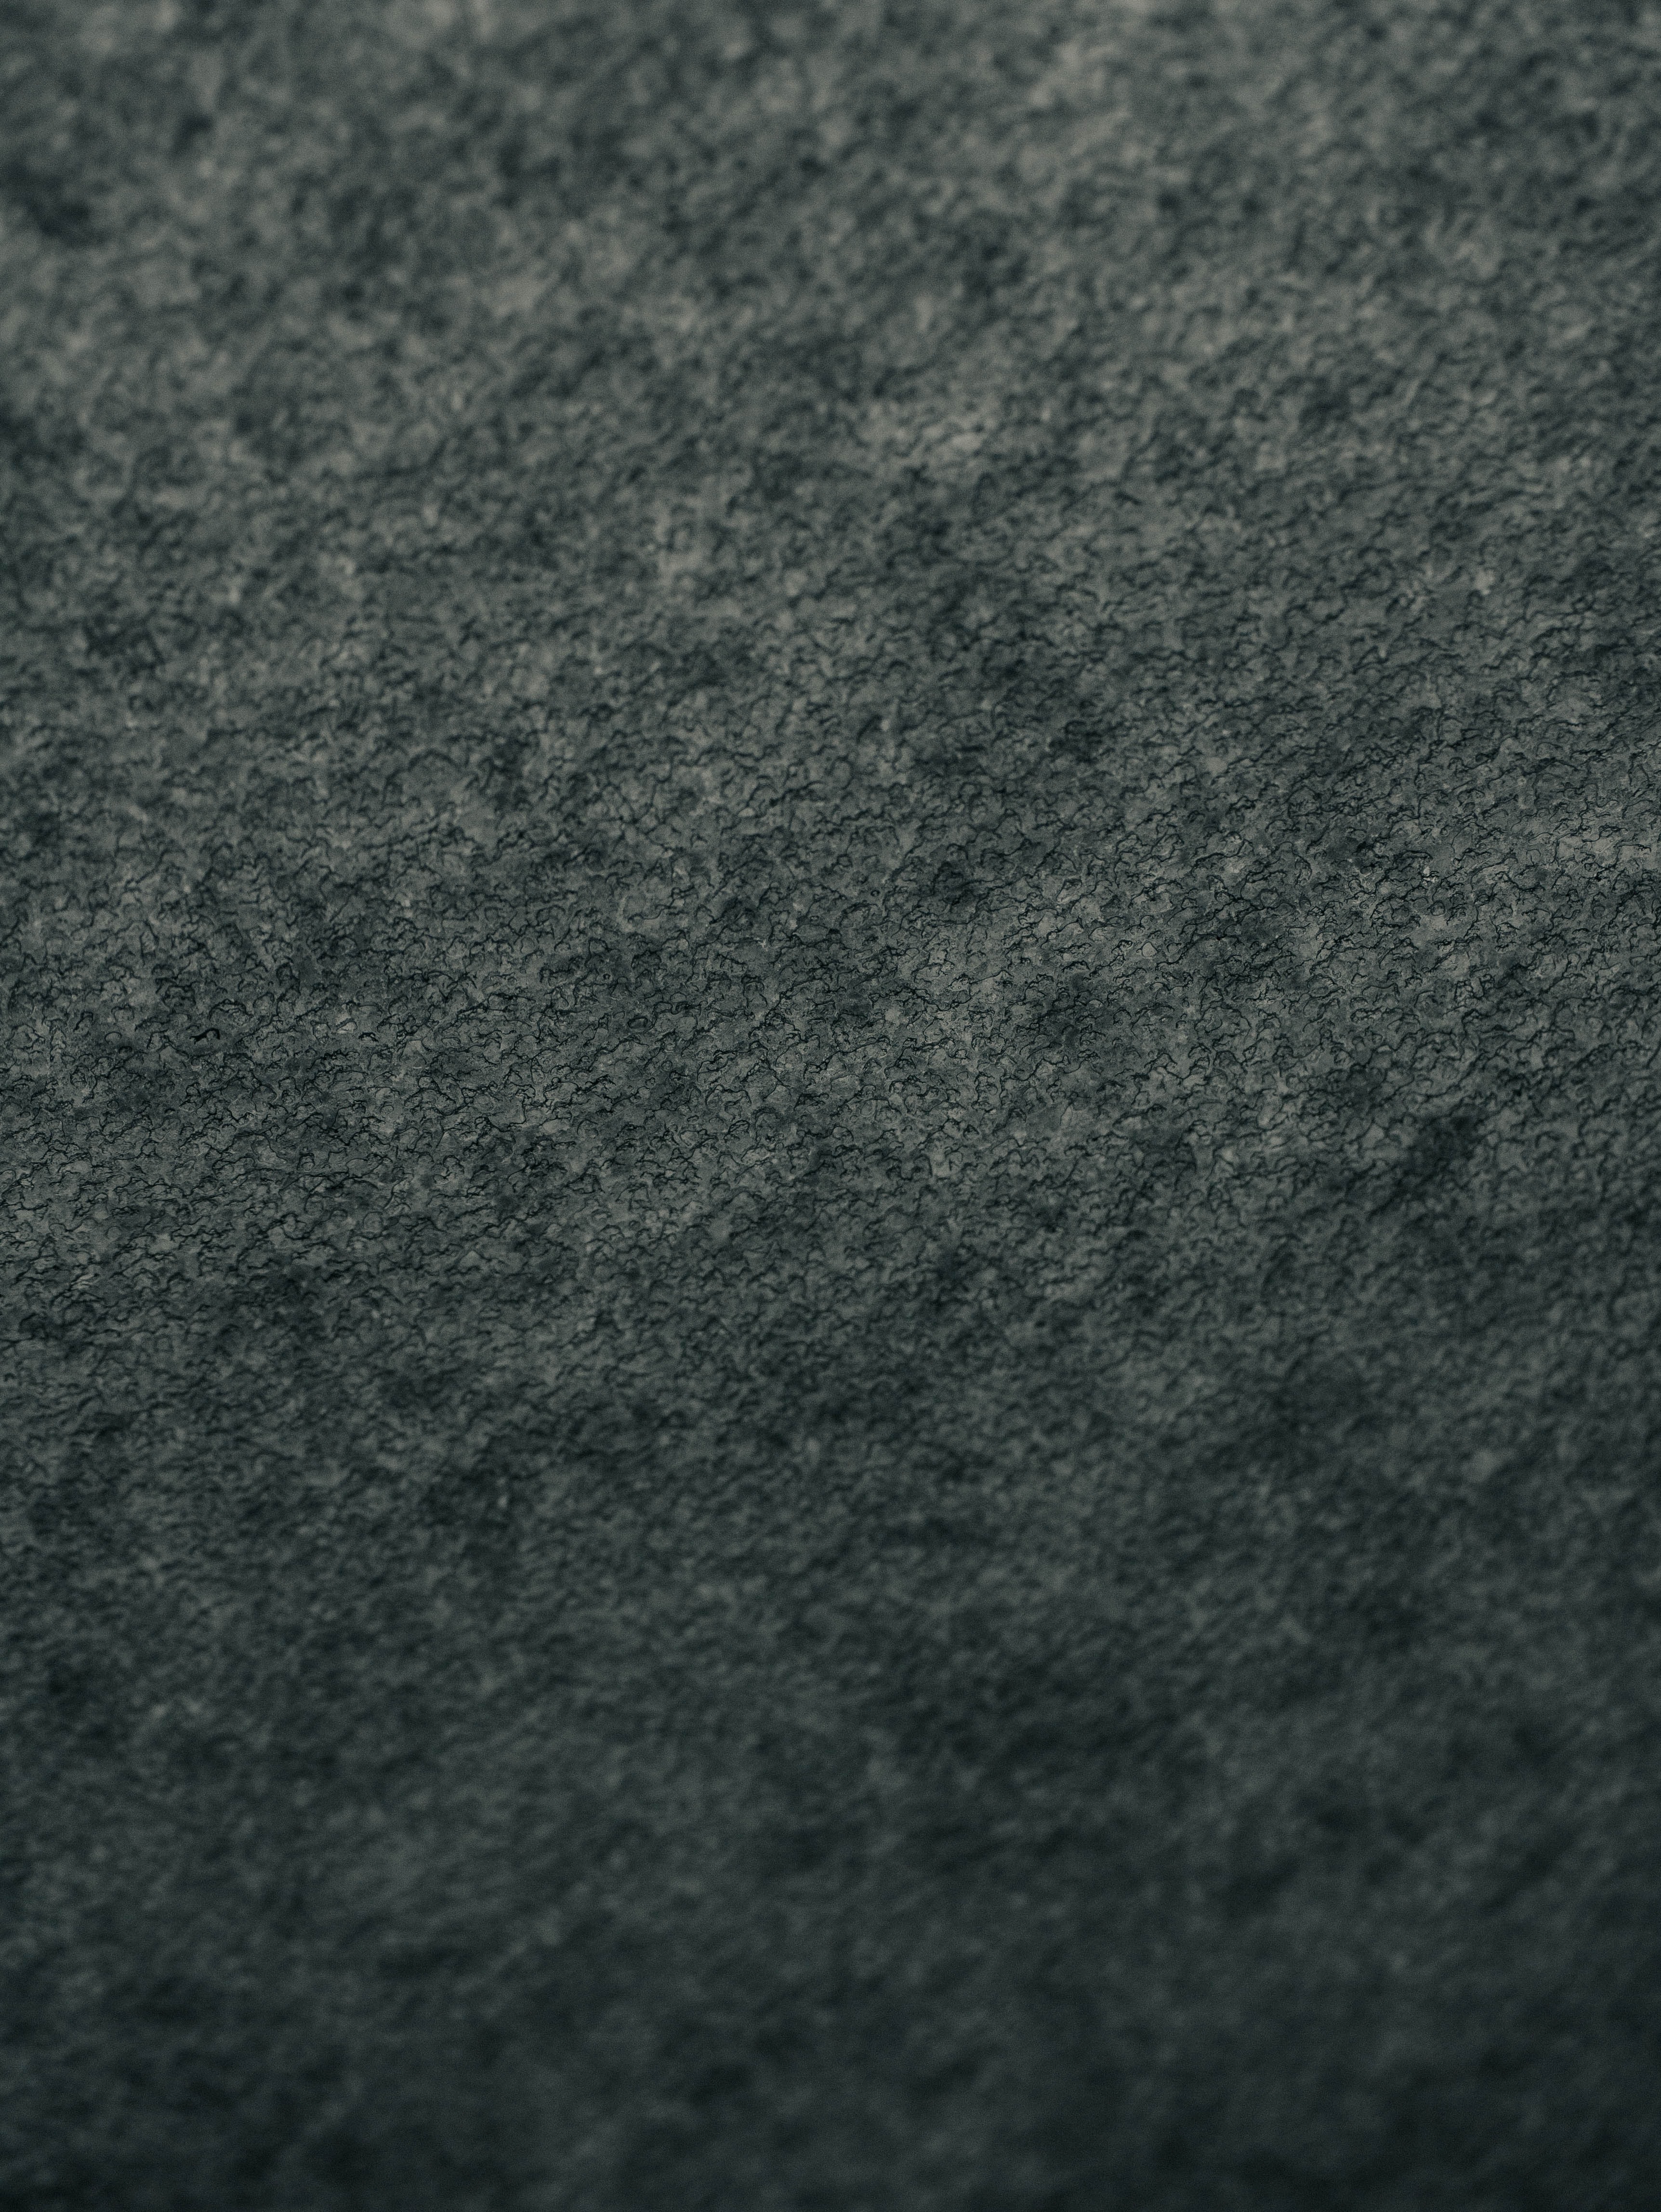 surface, texture, textures, relief, grey, rough, rugged phone background